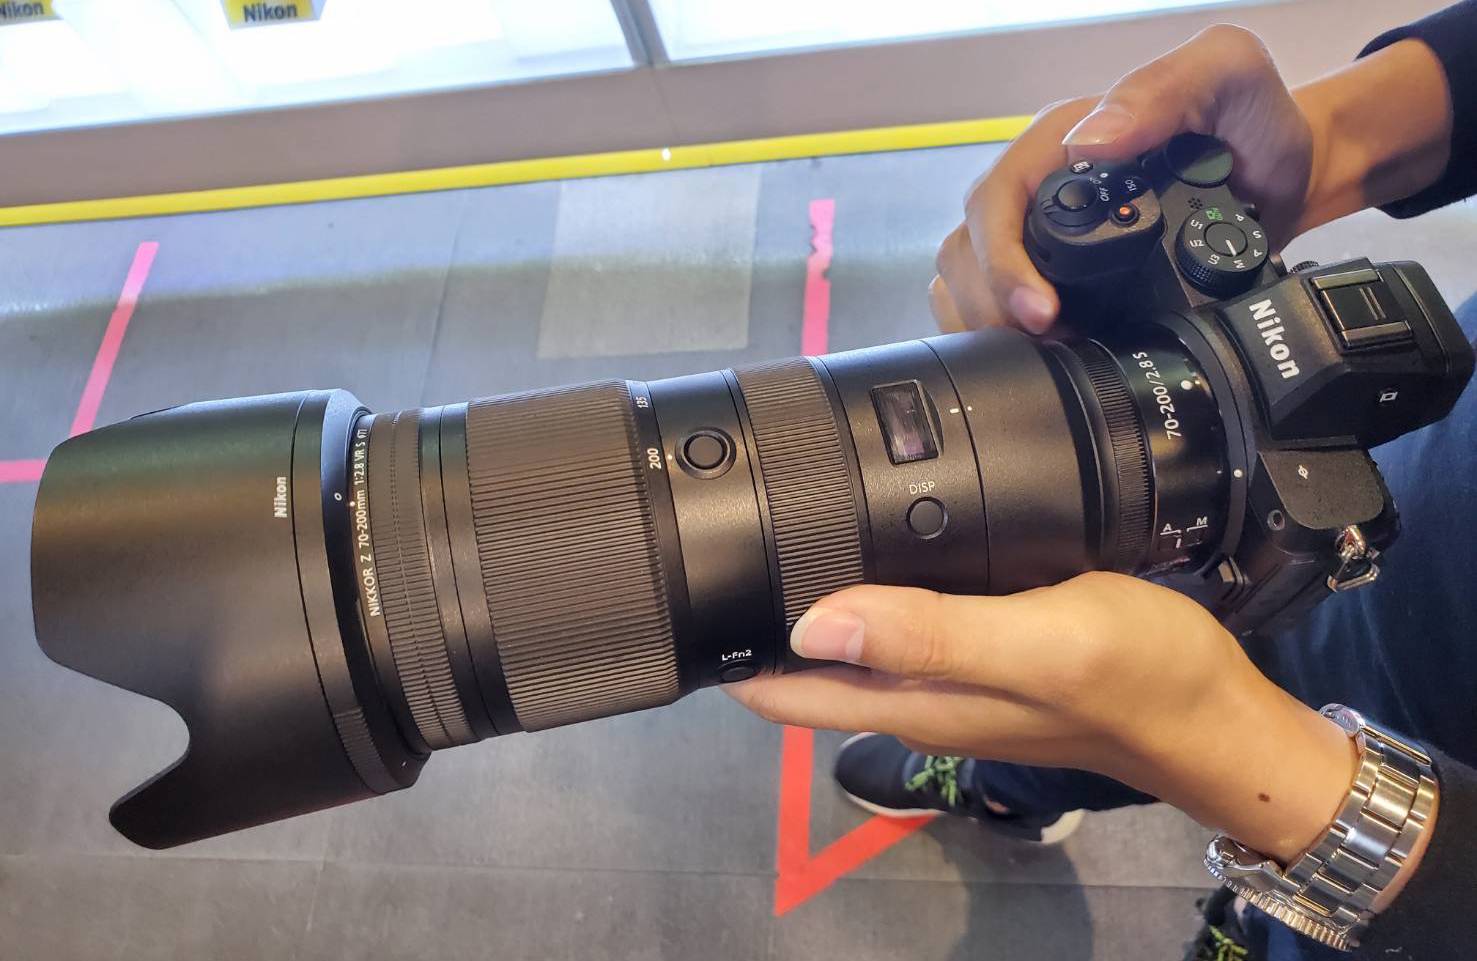 The Nikkor Z 70-200mm f/2.8 VR S lens and Z teleconverters are now